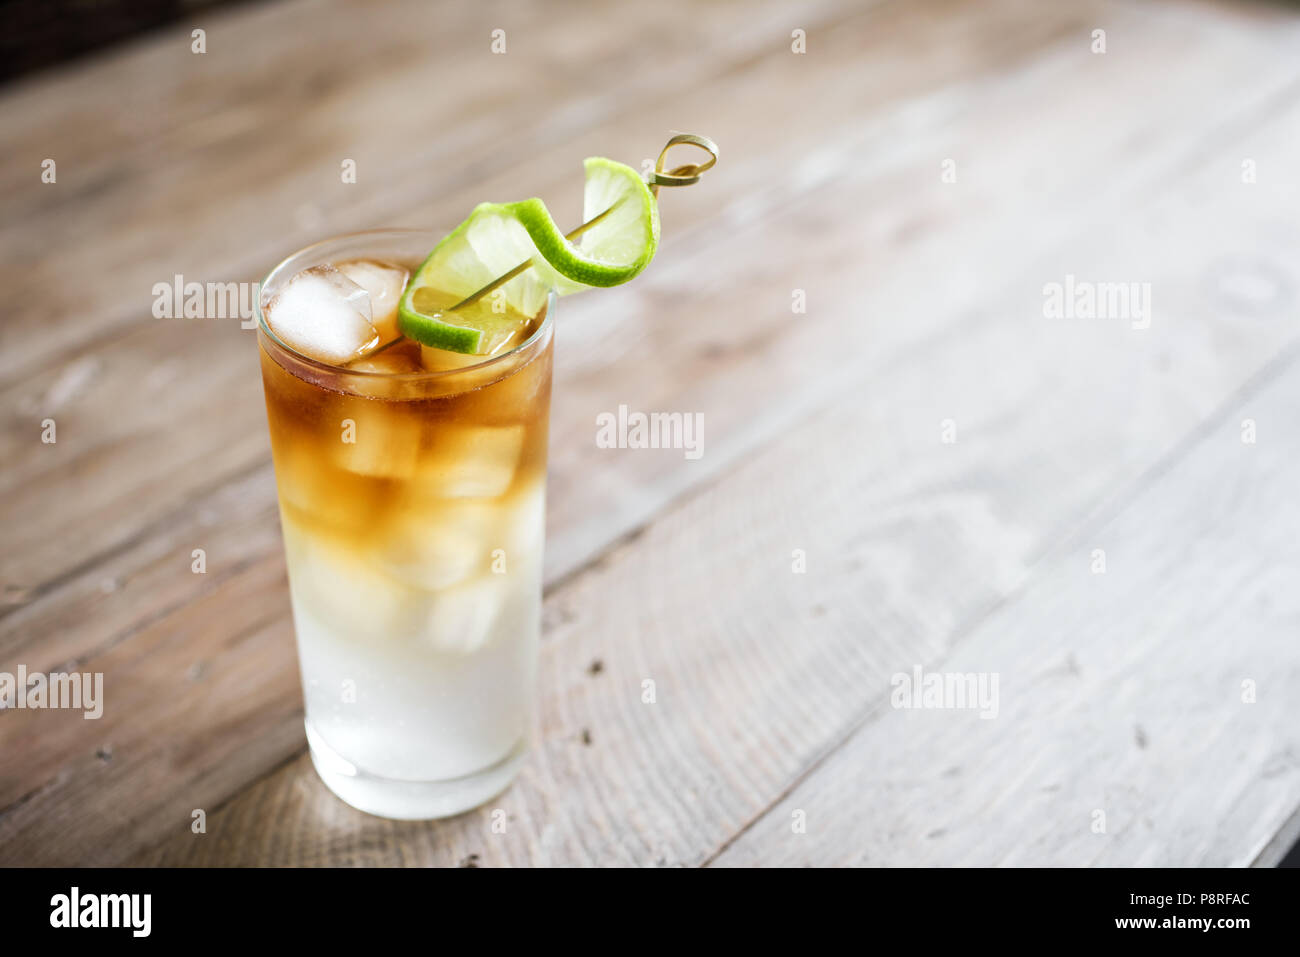 Dark and Stormy Rum Cocktail with Ginger Beer and Lime garnish. Glass of Dark and Stormy Cocktail drink on wooden table, copy space. Stock Photo